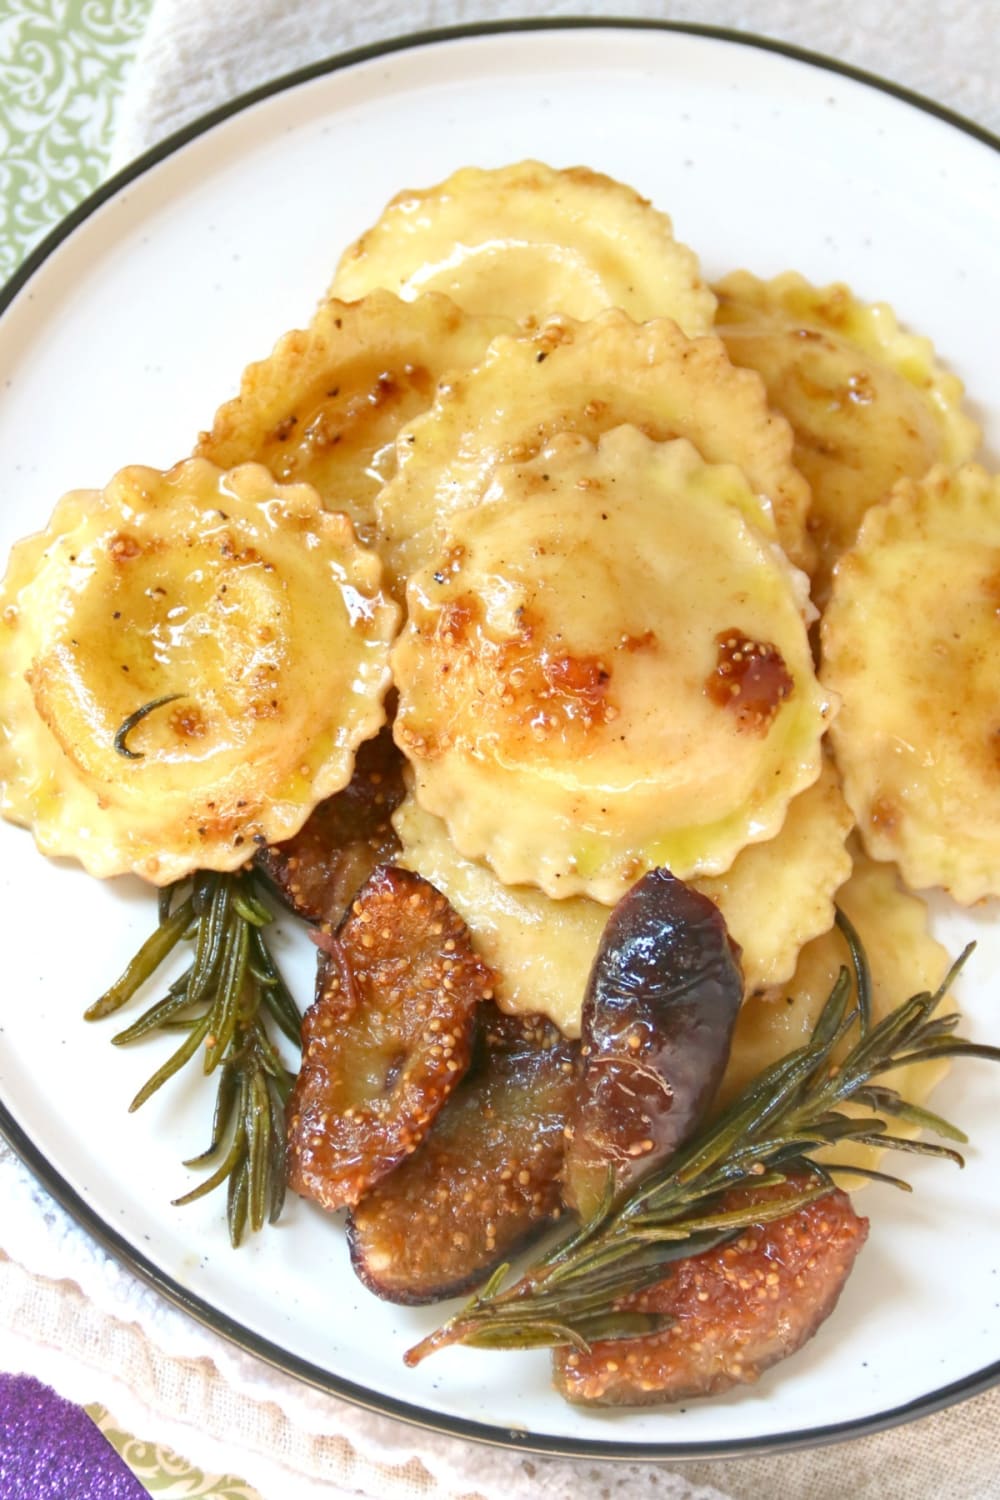 Caramelized Figs & Ravioli with Rosemary Avocado Plant-Based Butter